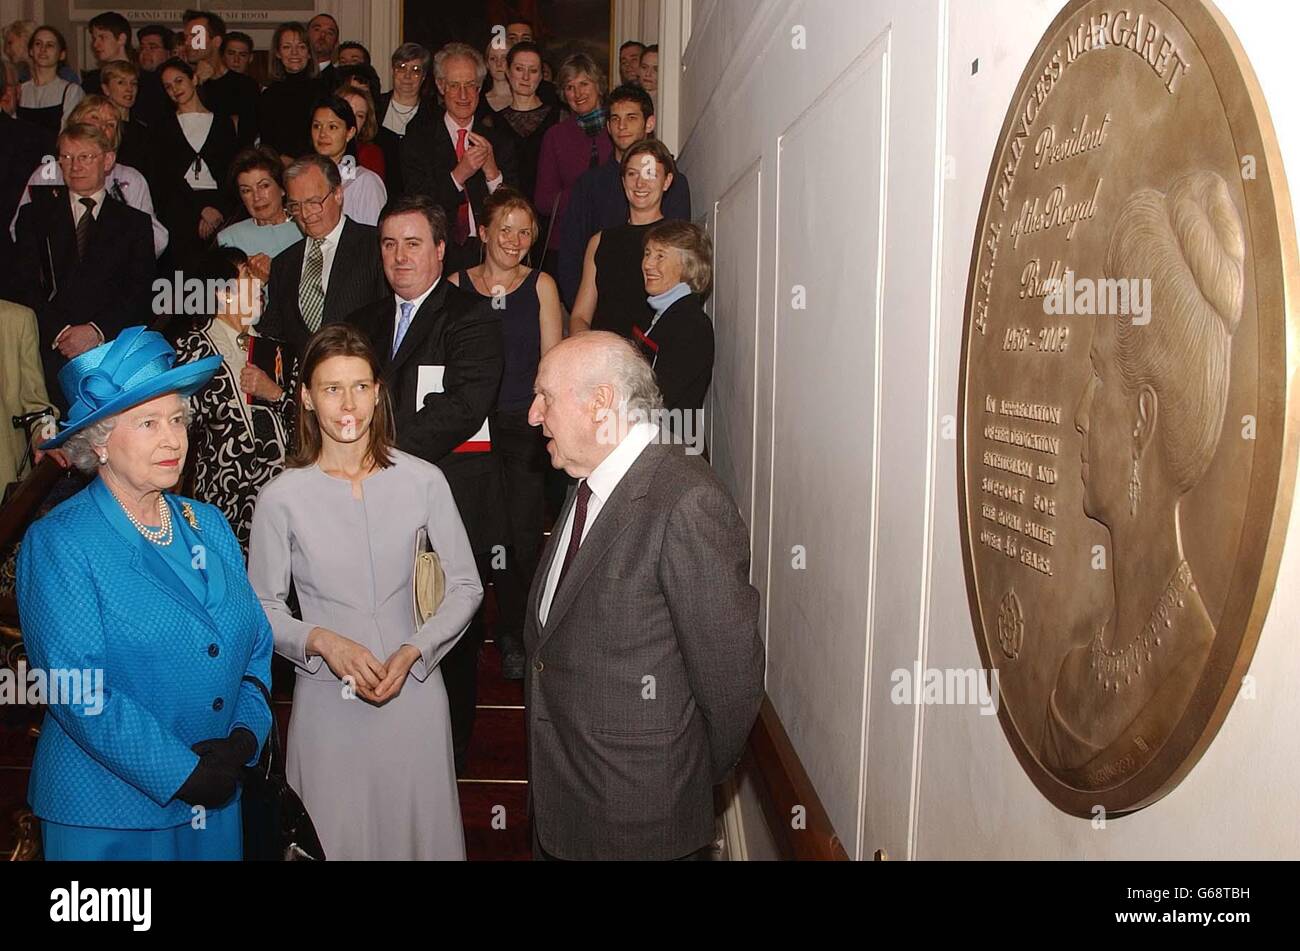 Britain's Queen Elizabeth II, with her niece Lady Sarah Chatto, (the daughter of the late Princess Margaret) admire the work of the sculptor Rizello (right), a memorial plaque dedicated to Princess Margaret, in the Royal Opera house. * The Queen toured the newly built Royal Ballet school, which she officially opened in Covent garden this afternoon. Stock Photo